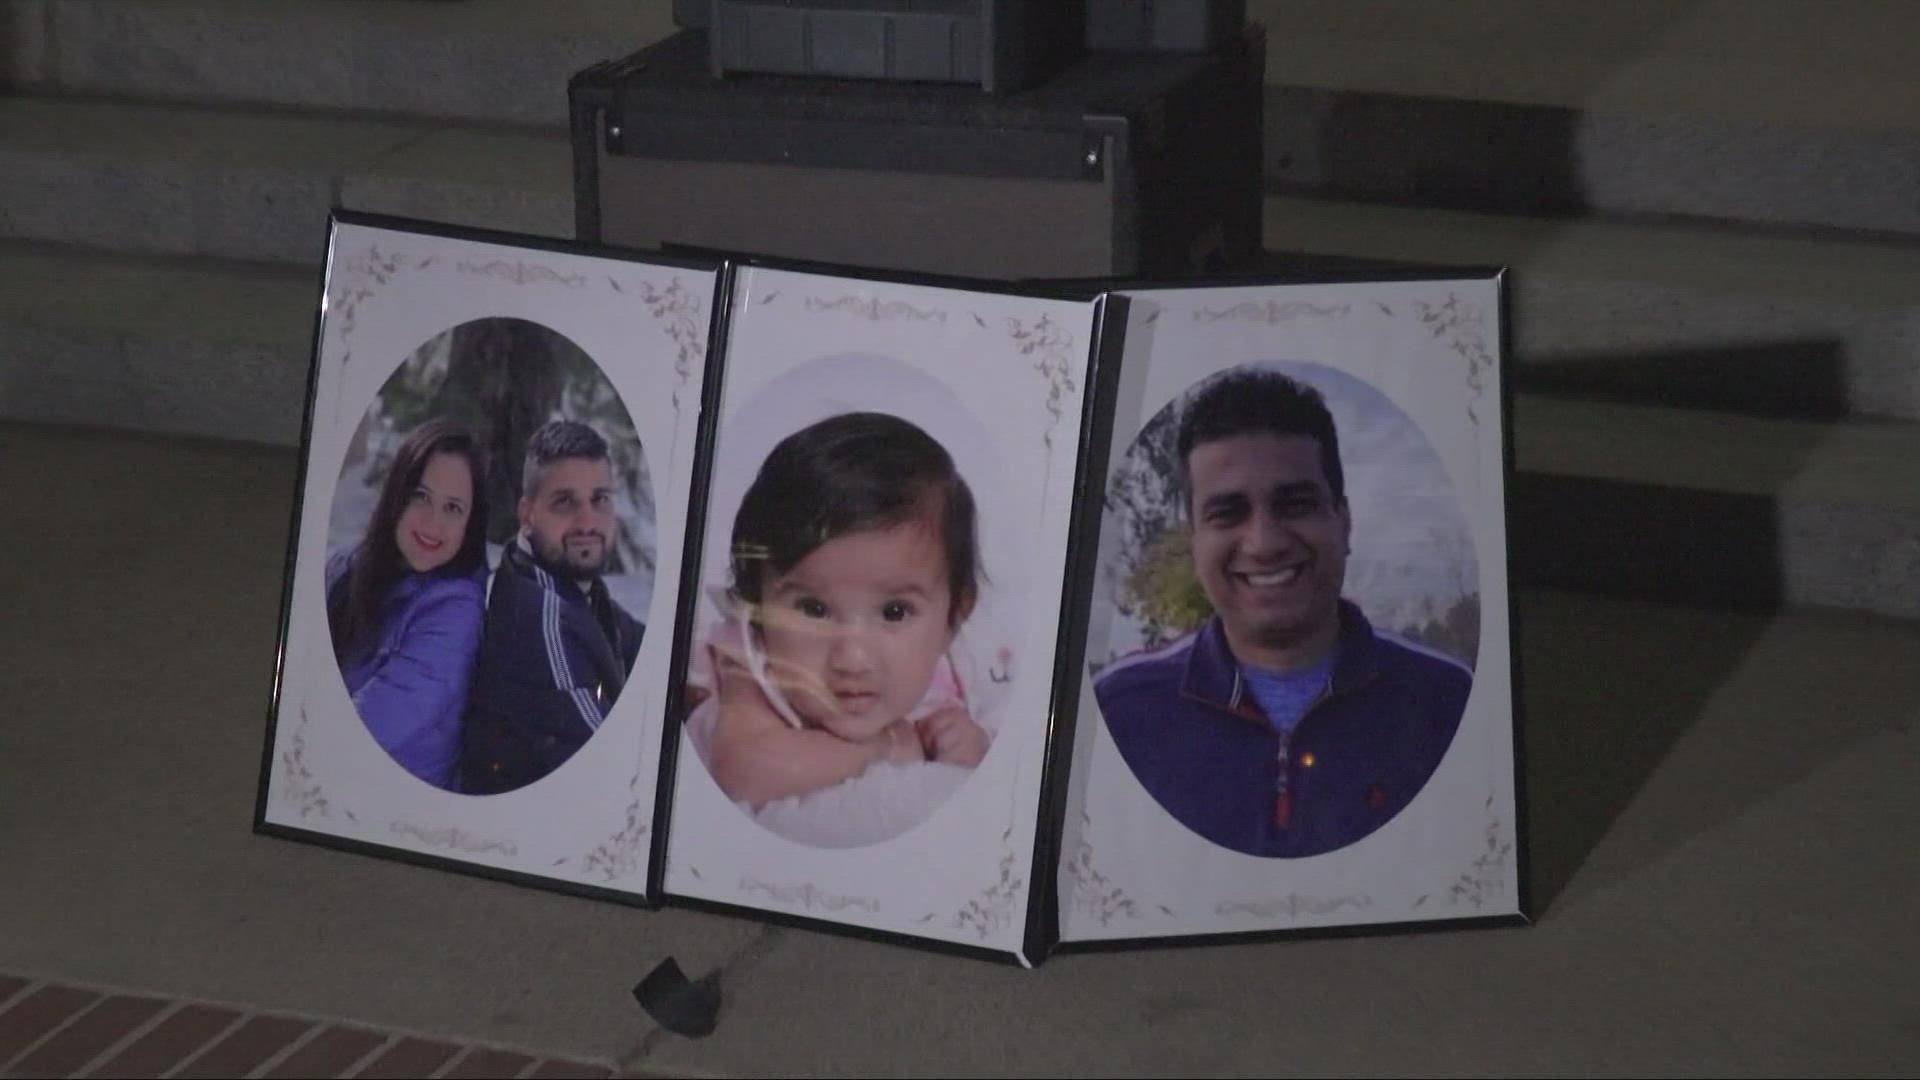 Merced Family Kidnapping:  The vigil came on the same day that suspect Jesus Salgado was charged in the kidnapping and killings of the family.